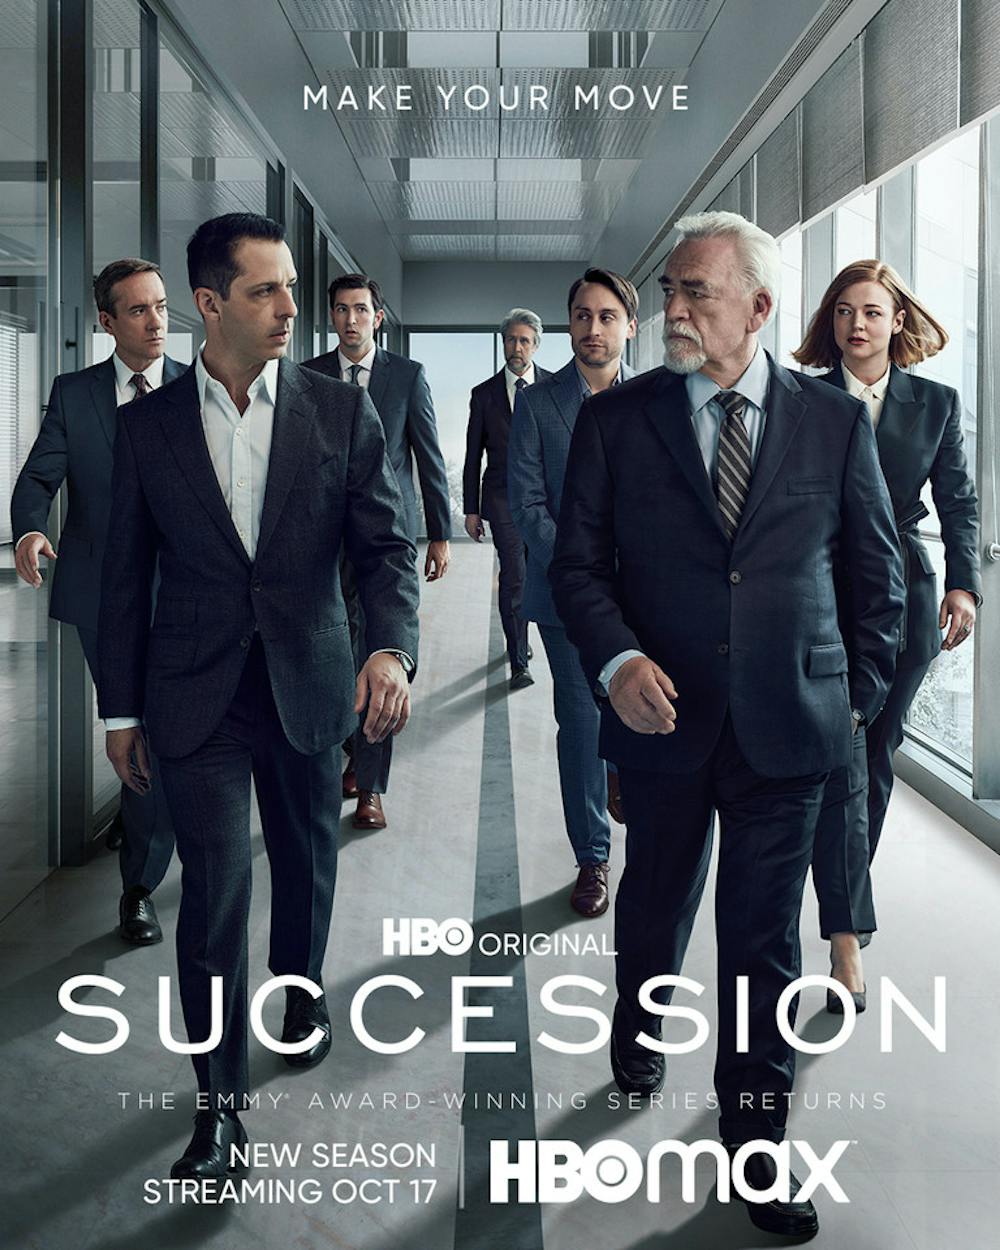 <p>Although the show’s storyline seems to be coming to a close, HBO has already renewed “Succession” for a fourth season.</p>